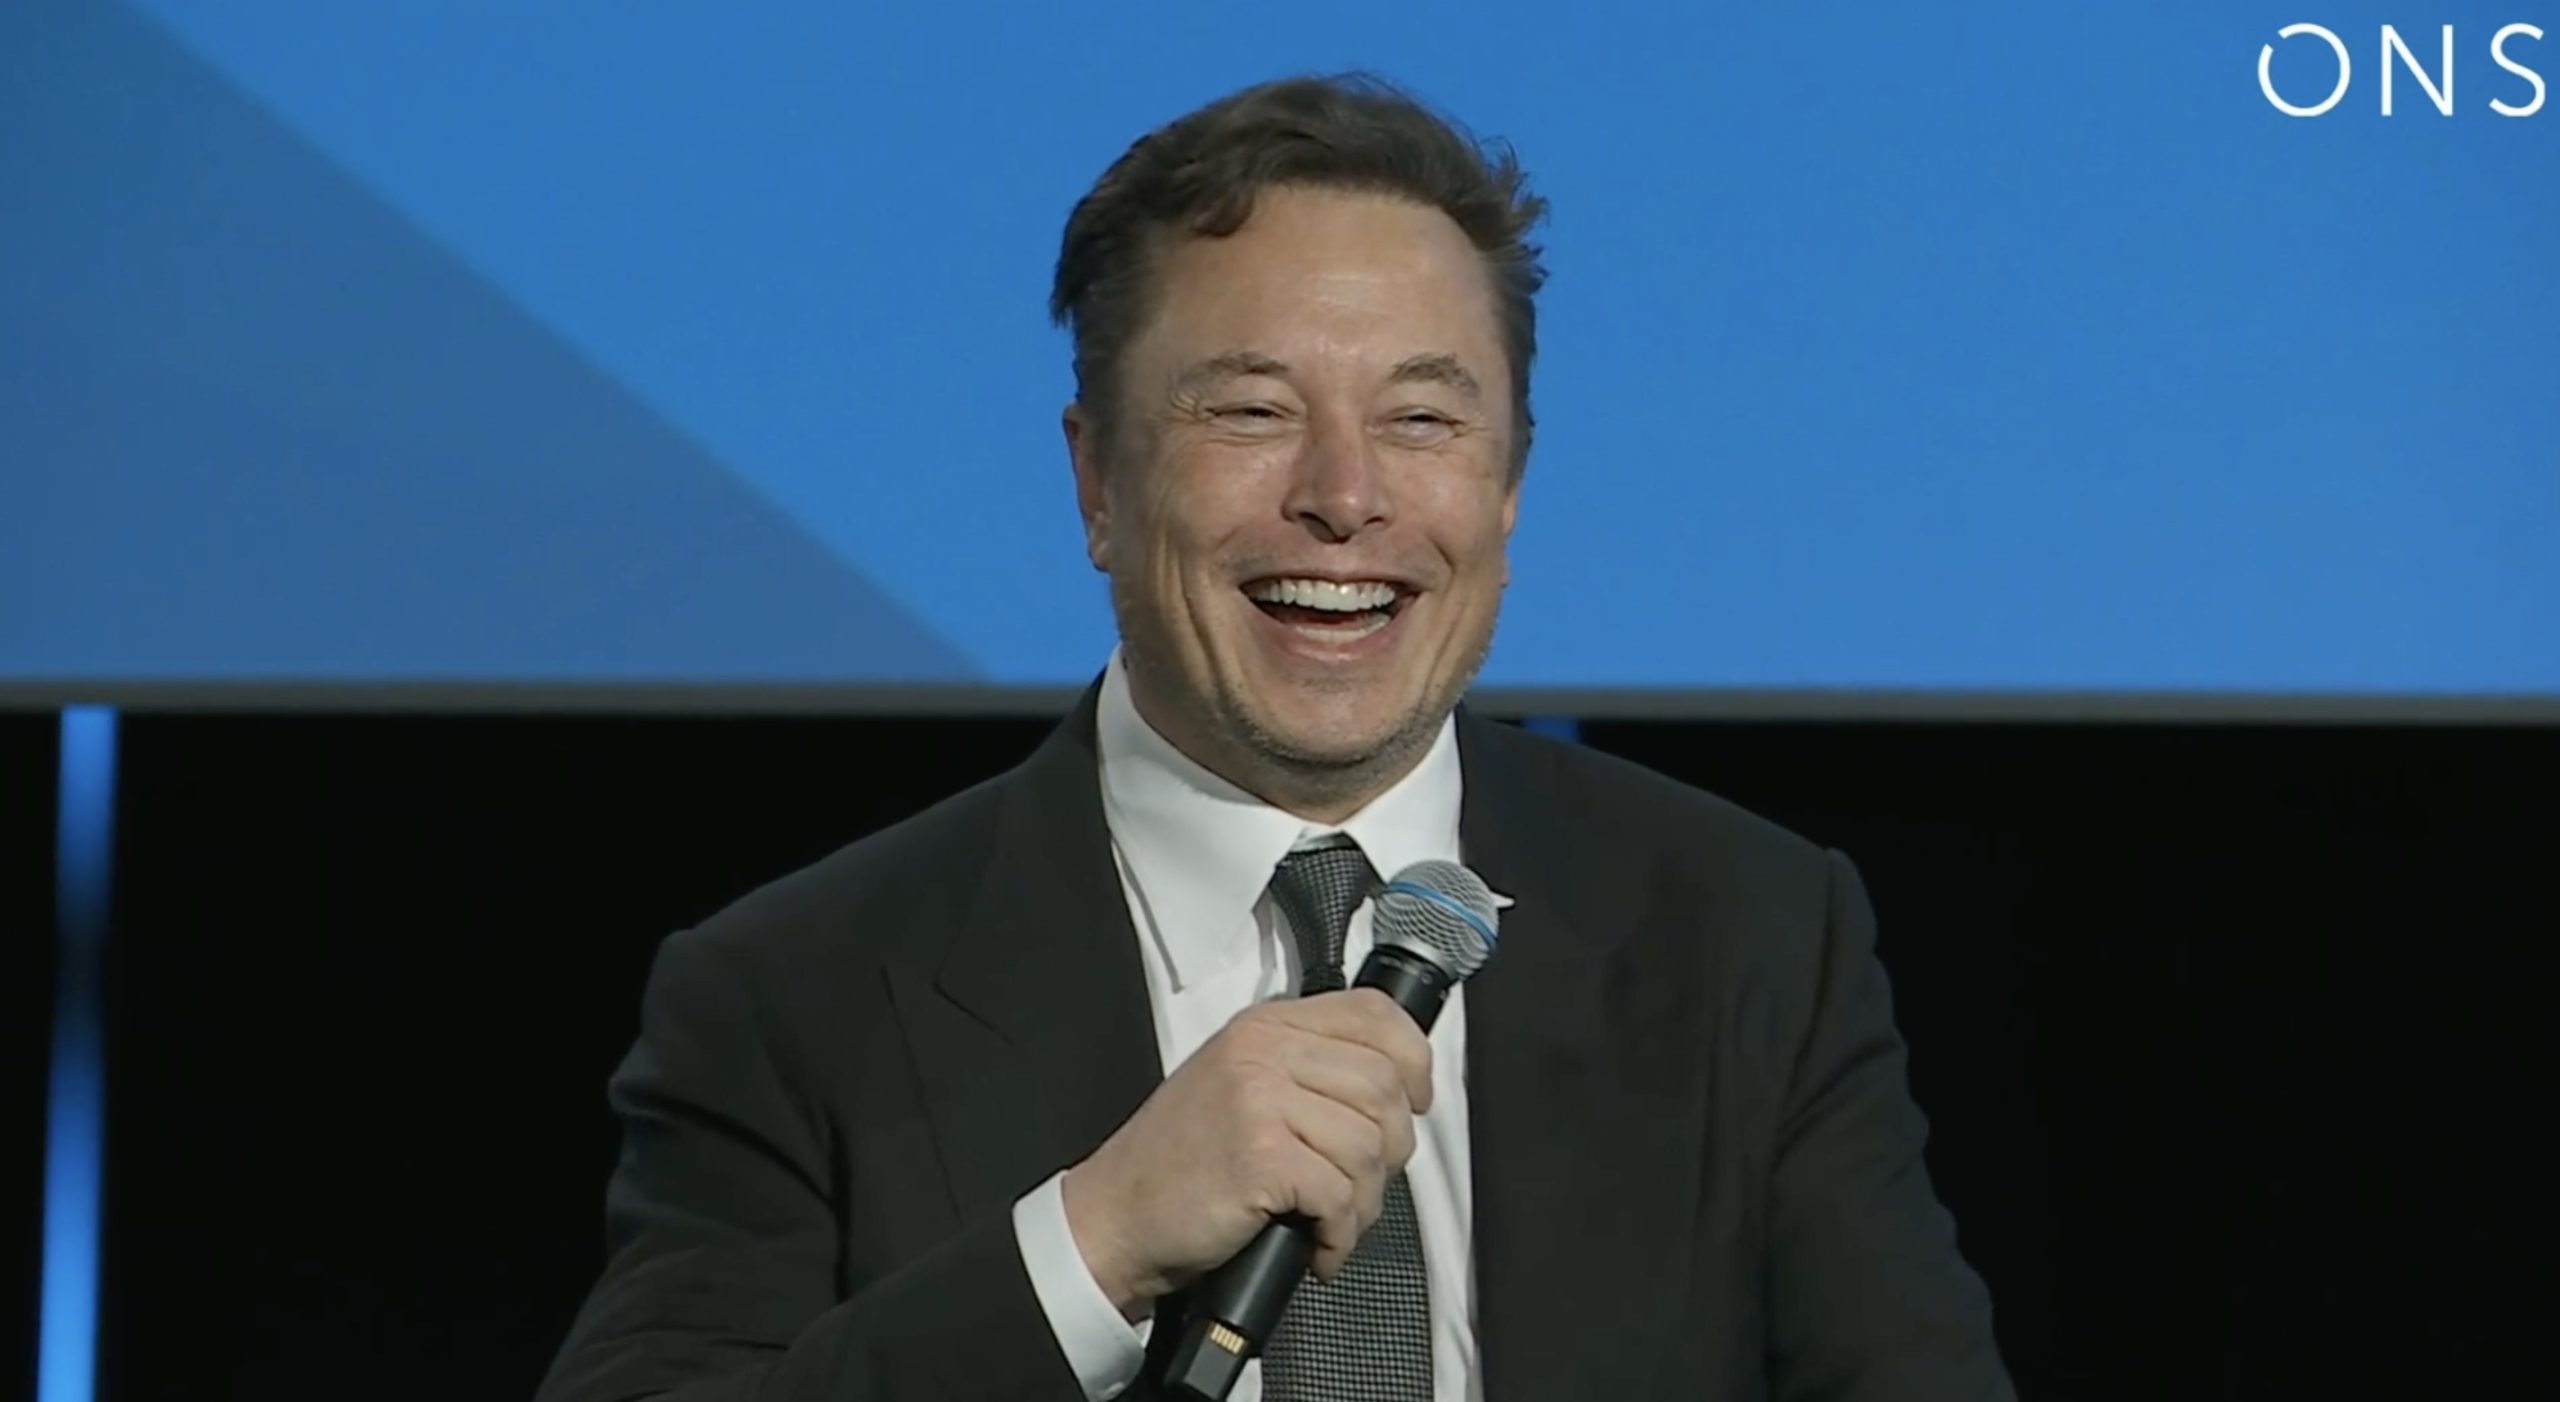 Elon Musk Norway 2022 ONS Conference